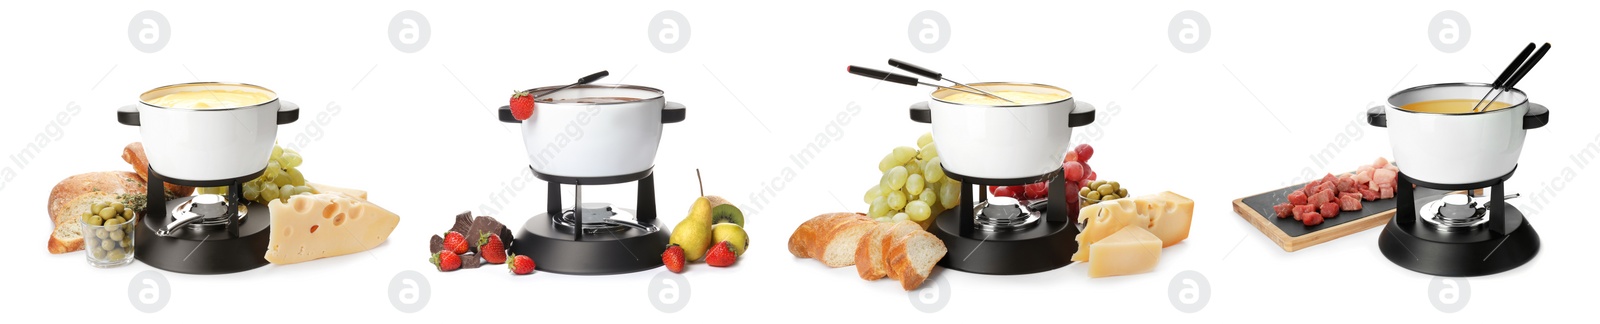 Image of Set with different fondue pots and products on white background. Banner design